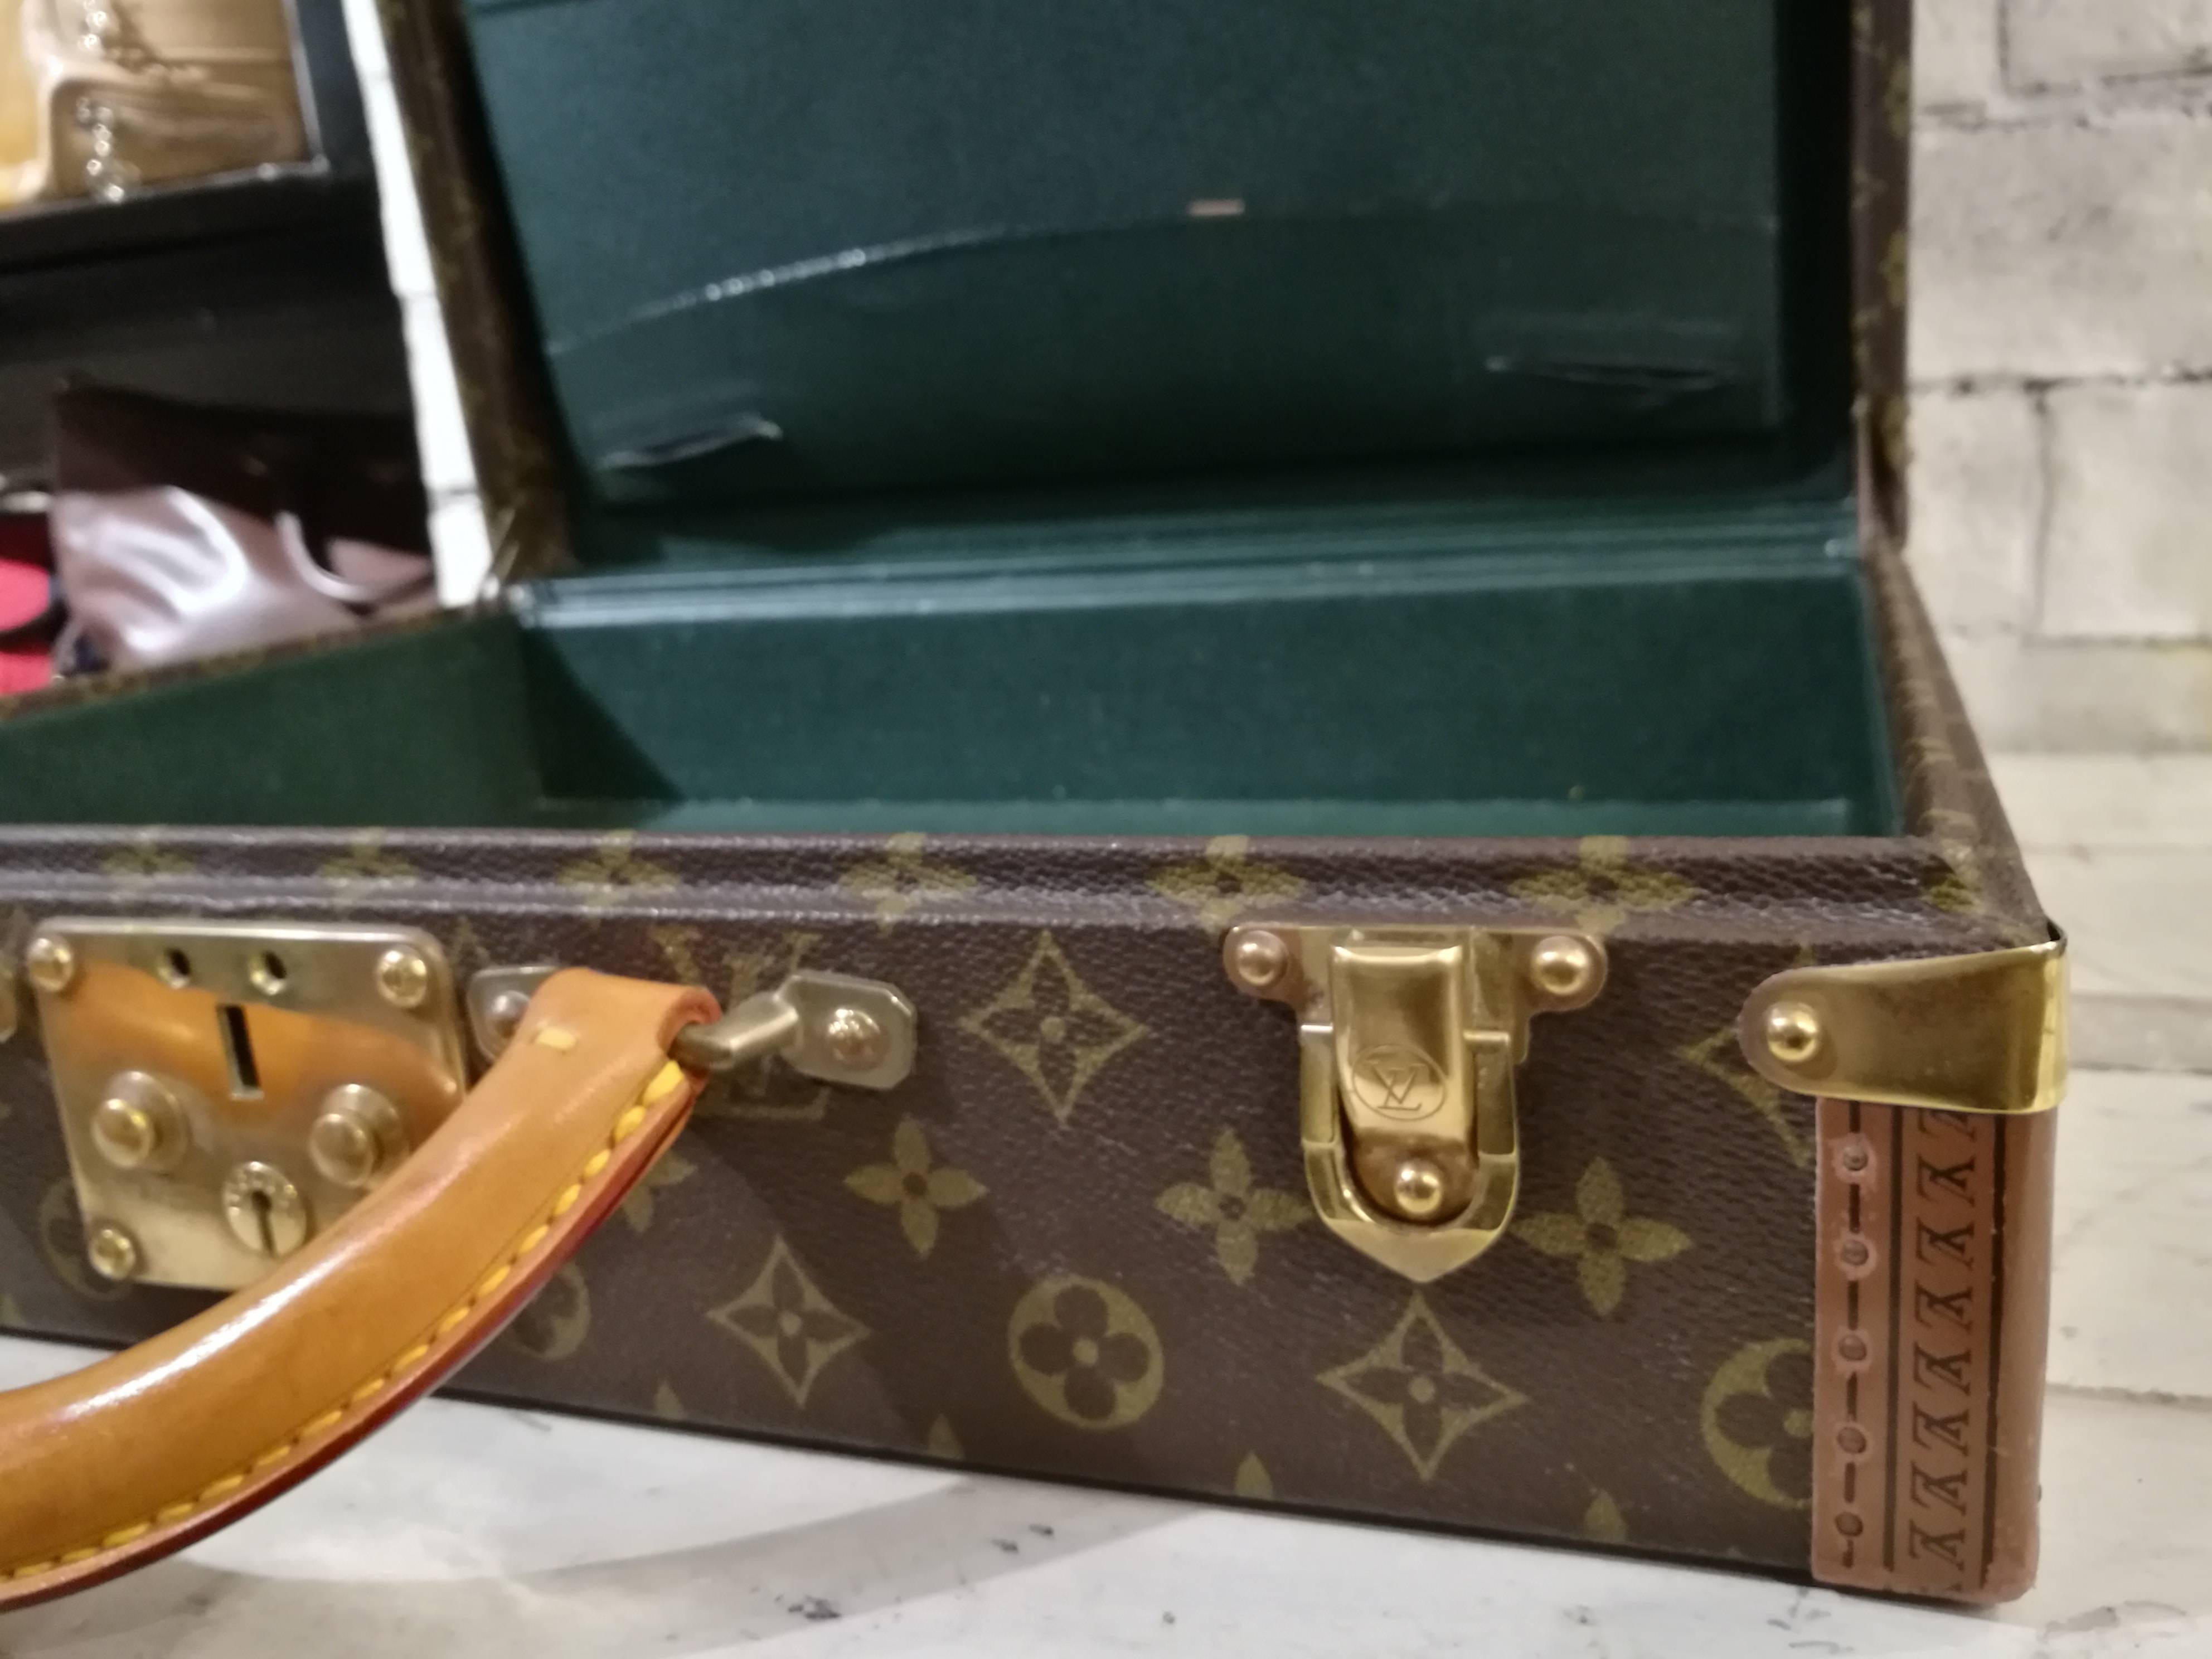 Louis Vuitton Vintage Monogram Luggage
Totally made in france
The inside is green leather